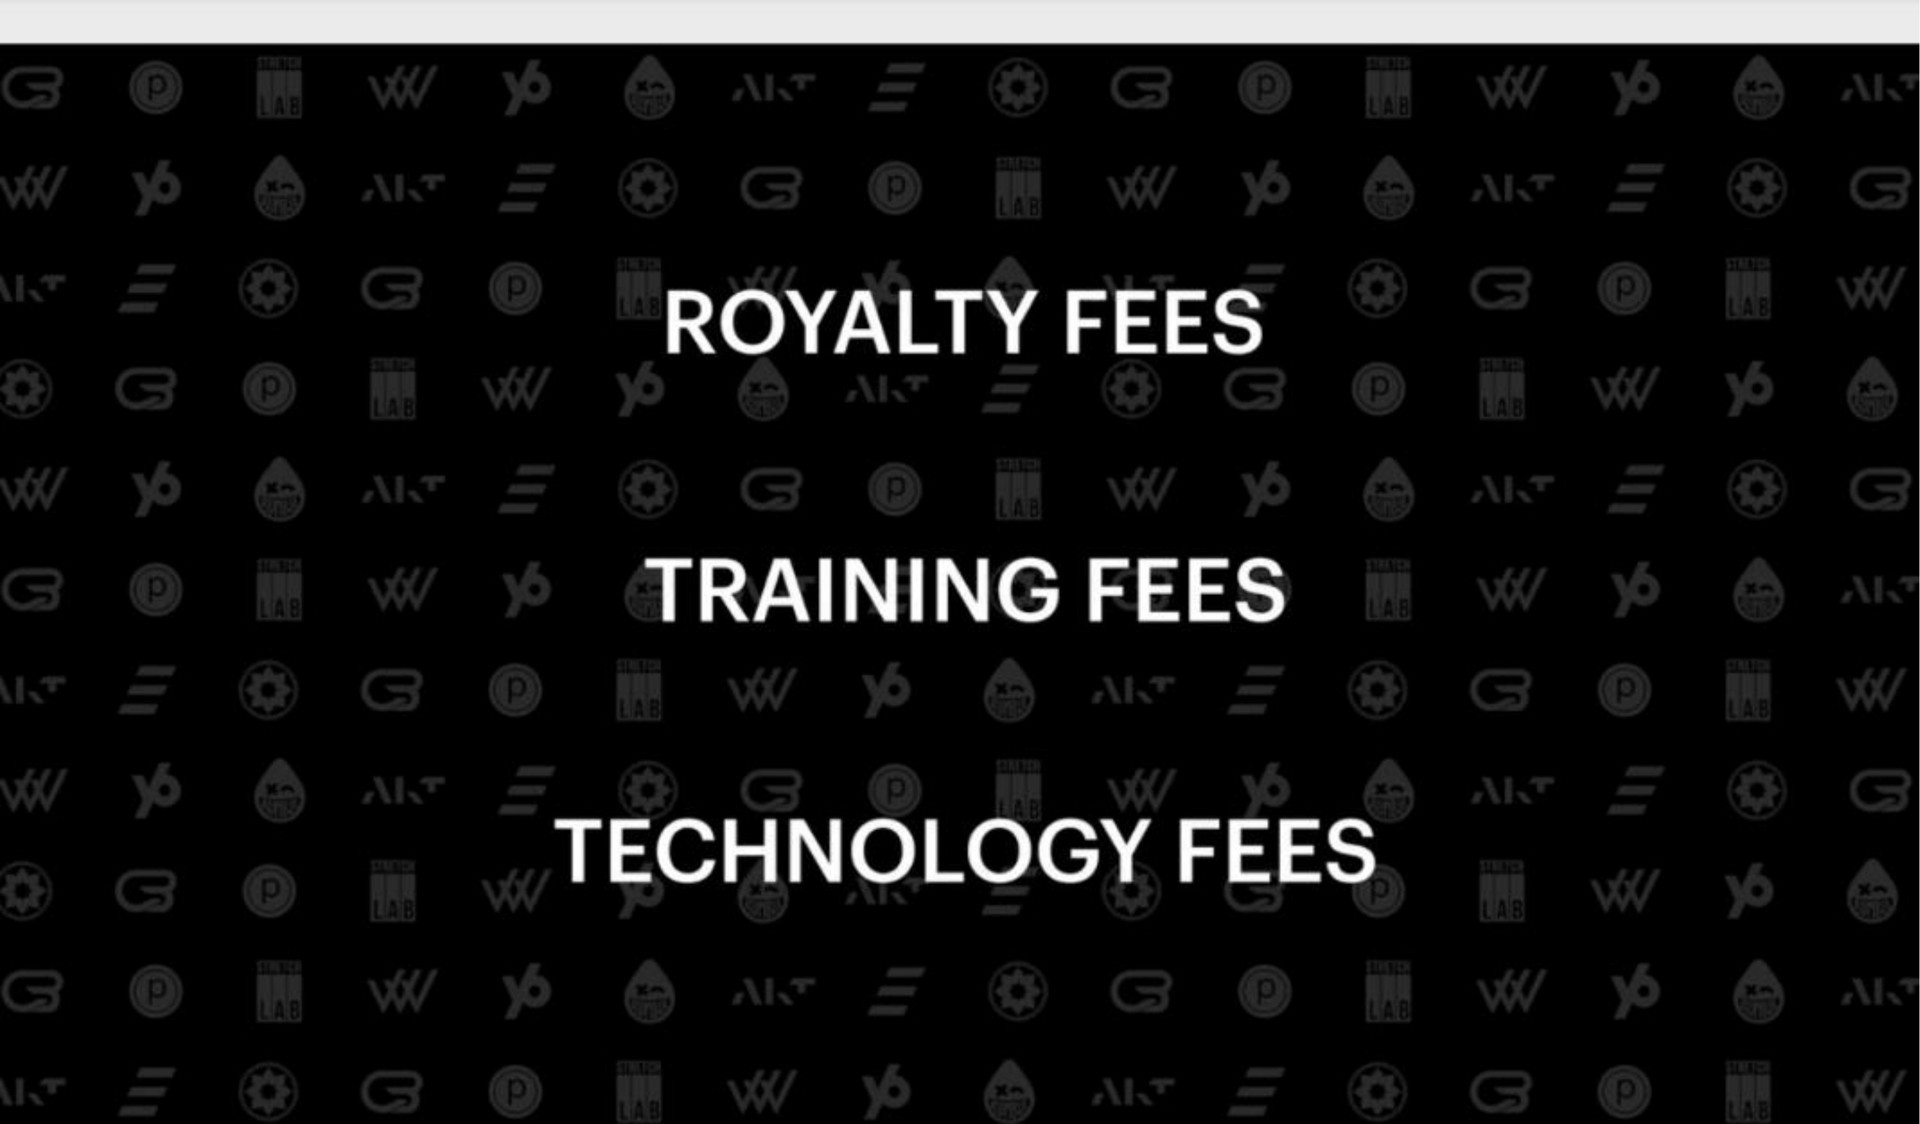 royalty fees training fees technology fees | Xponential